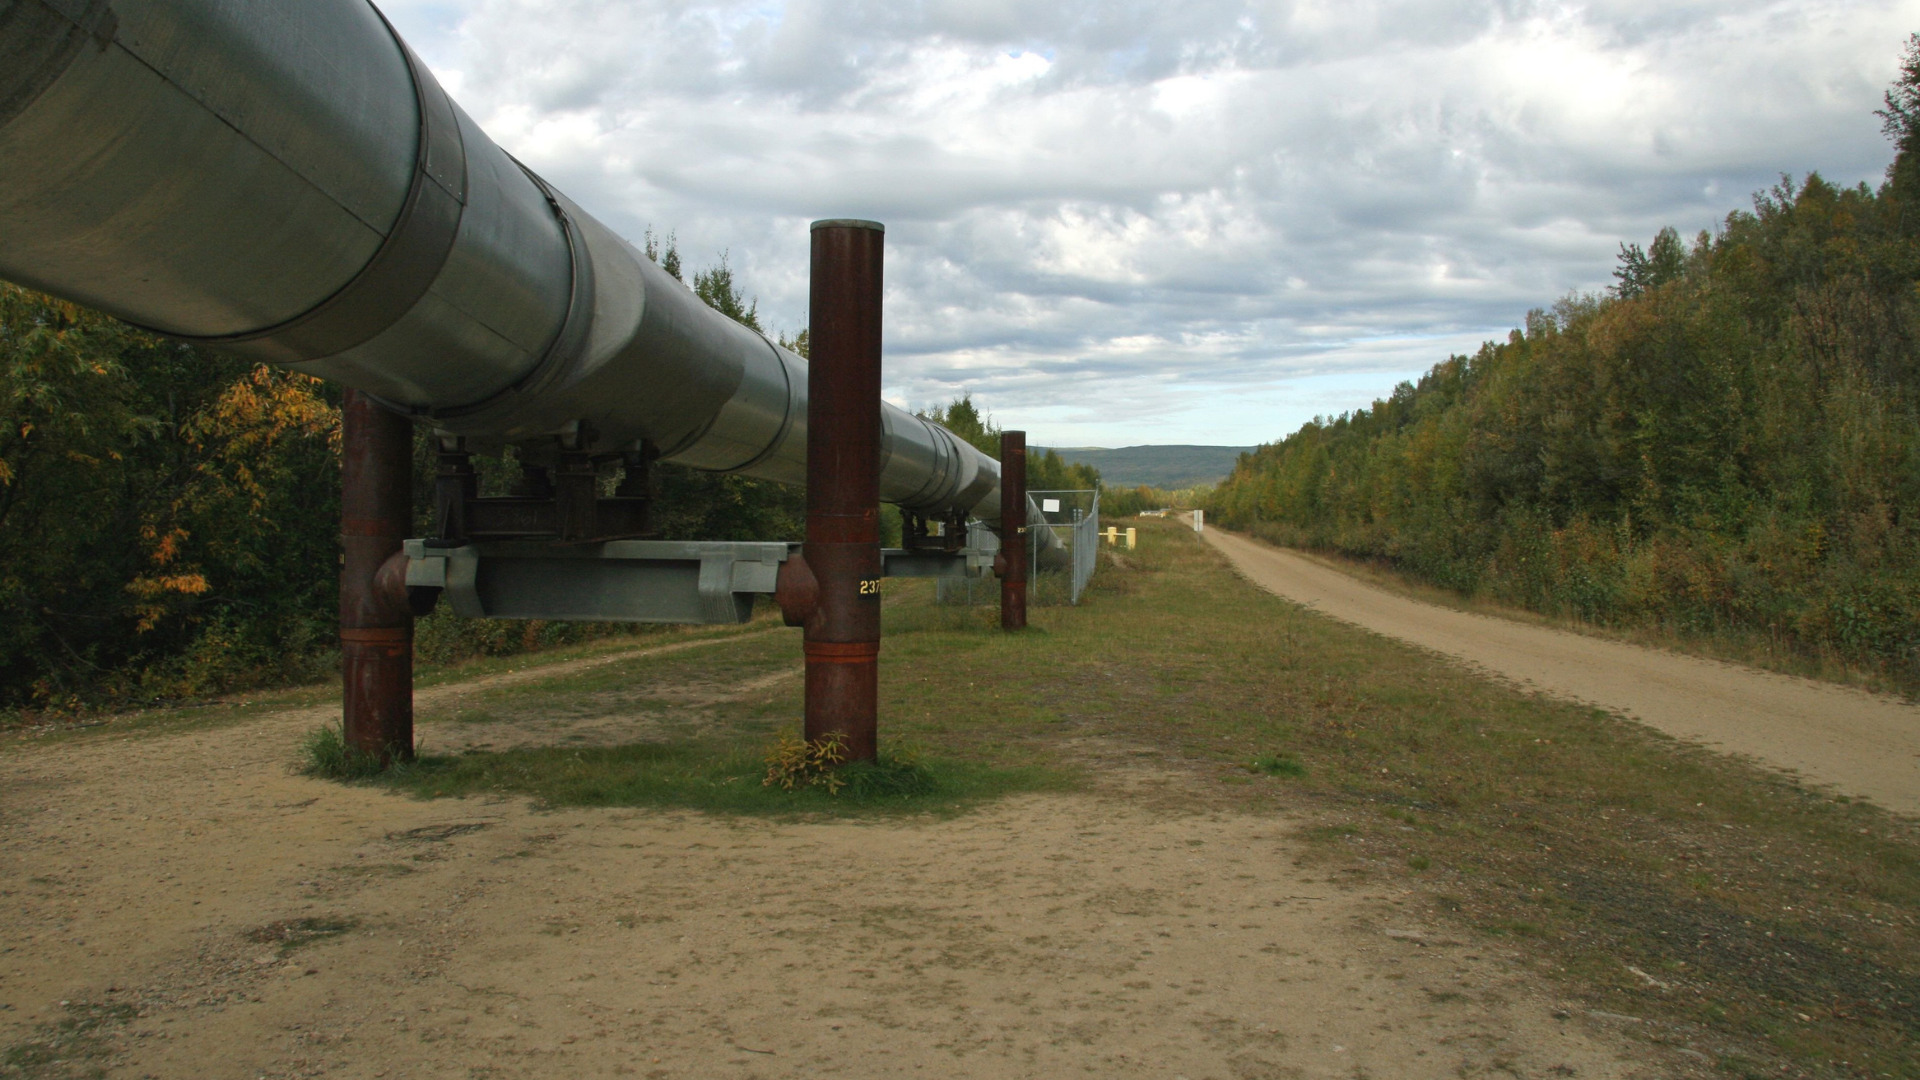 North South Gas Pipeline Project